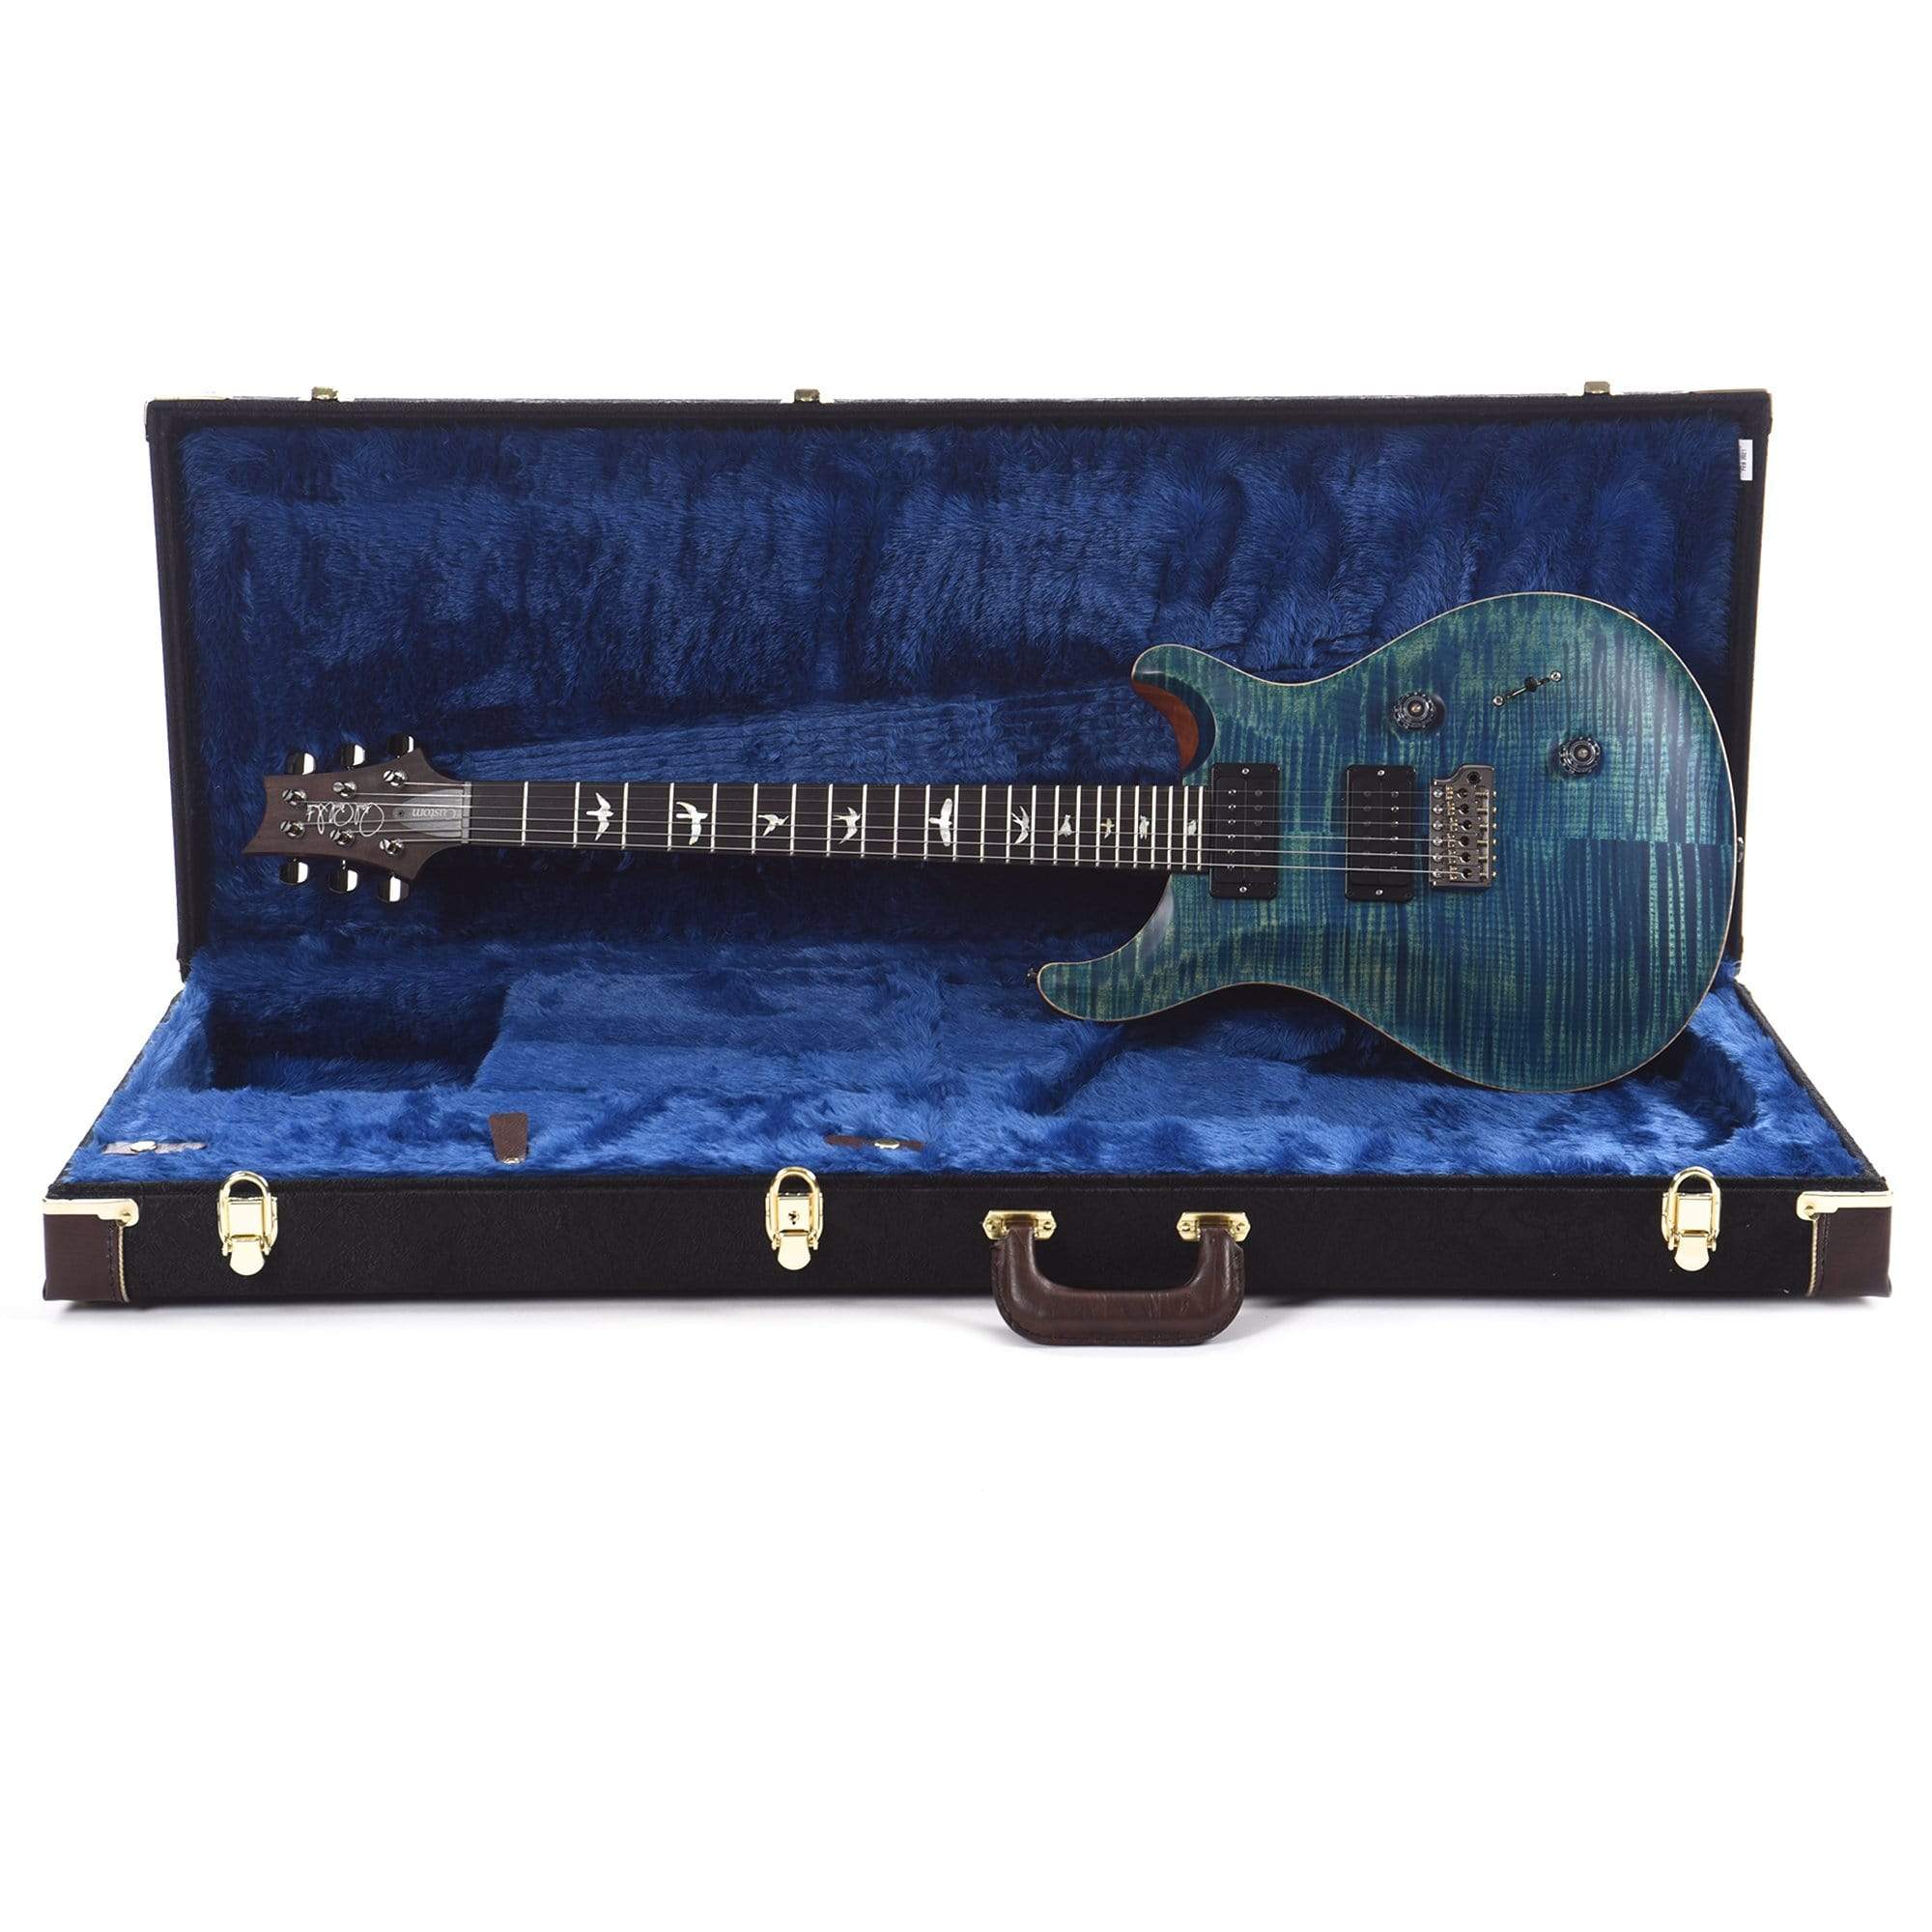 PRS Wood Library Custom 24 10 Top Flame River Blue Satin w/Pattern Thin Torrefied Maple Neck & Brazilian Rosewood Fingerboard Electric Guitars / Solid Body